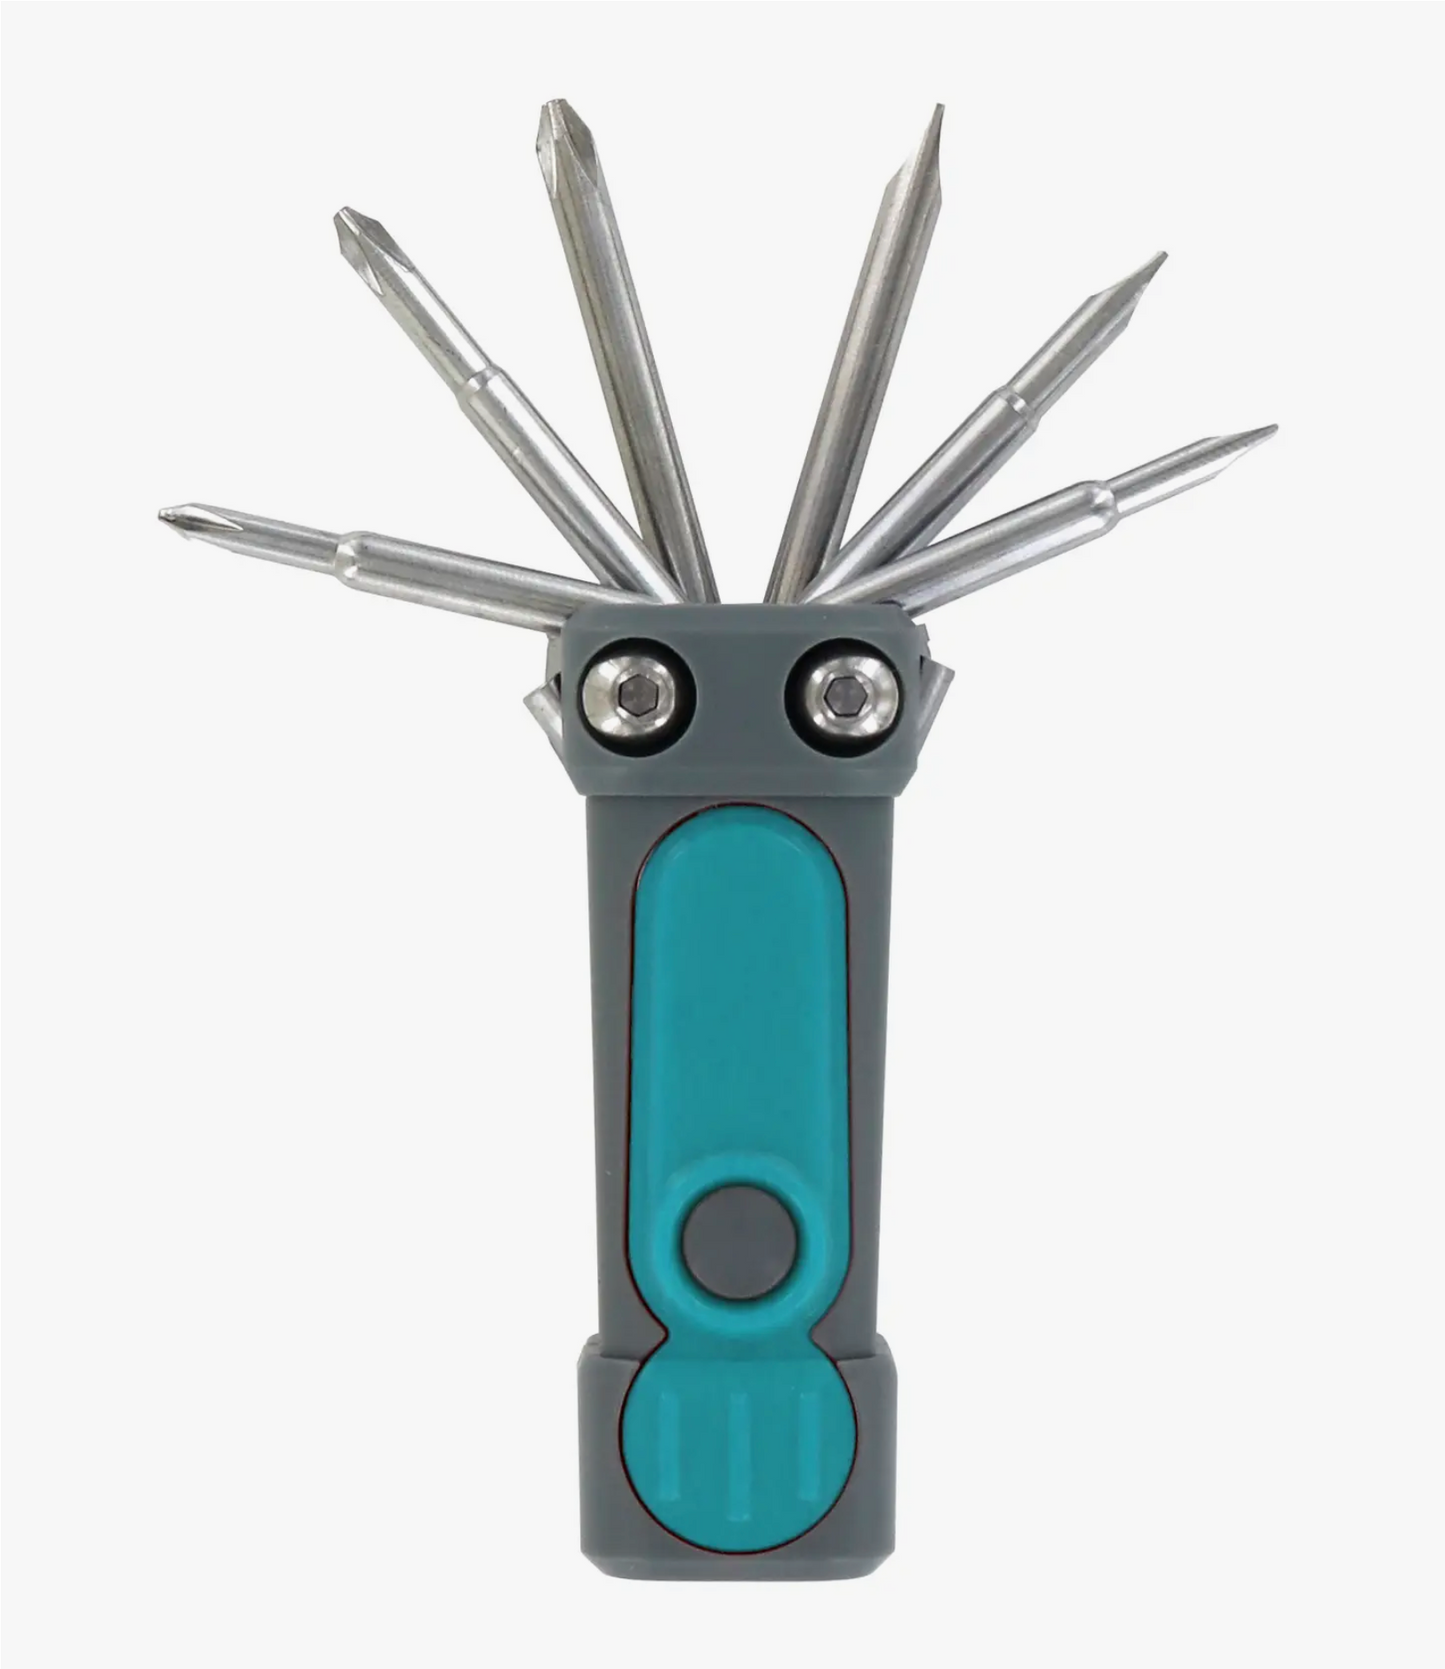 8-in-1 Pocket Toolkit